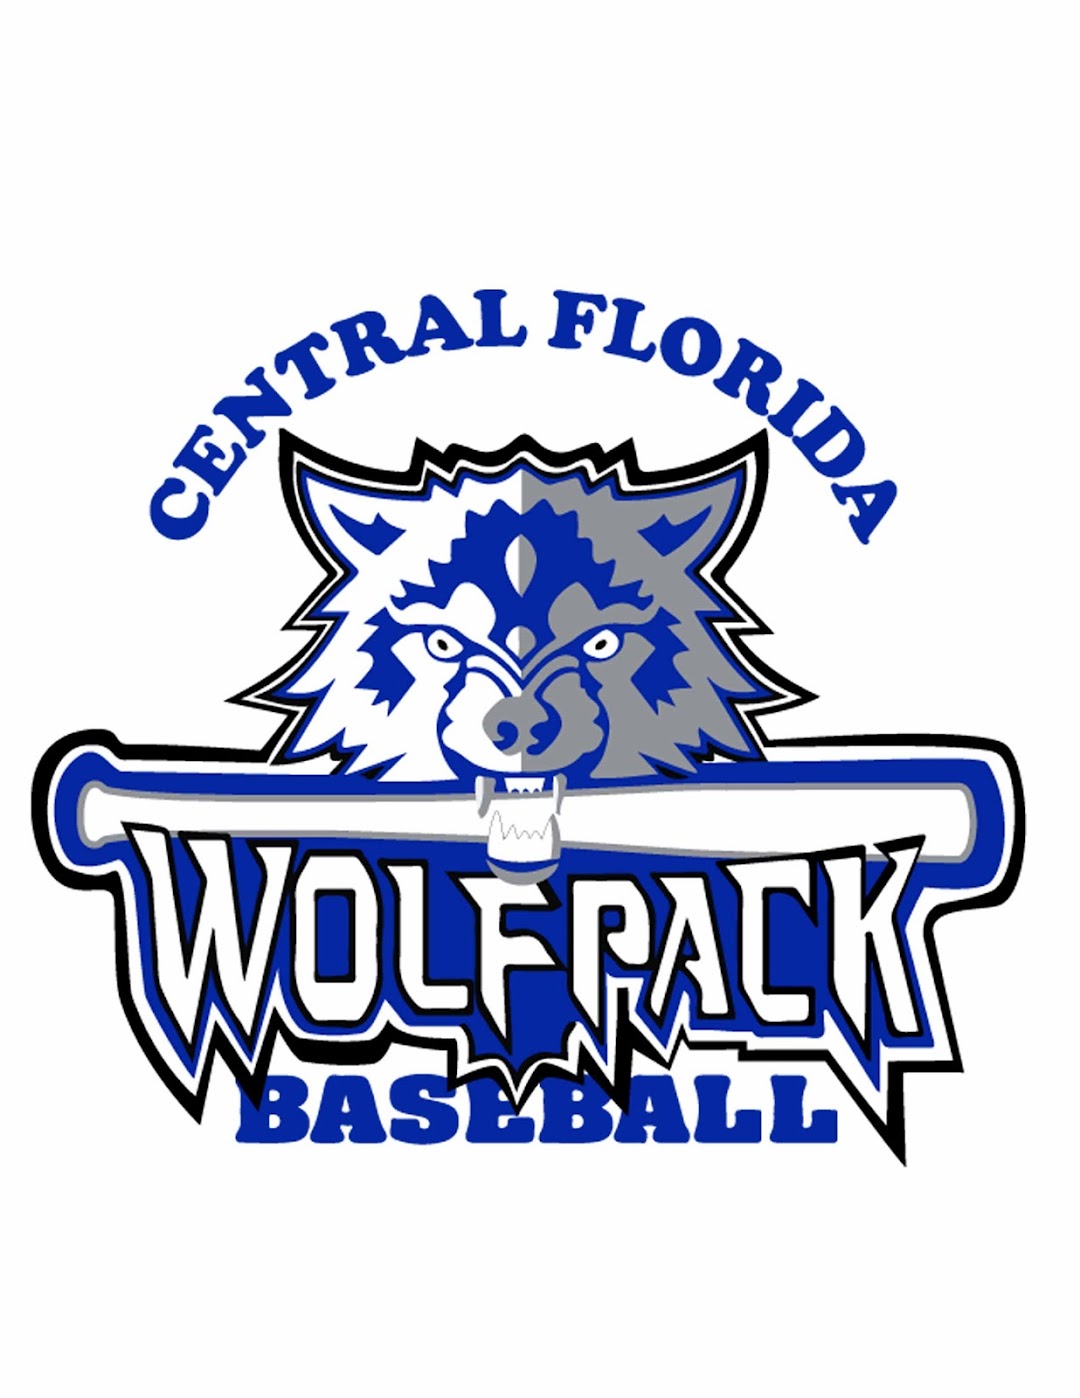 Central Florida Wolfpack